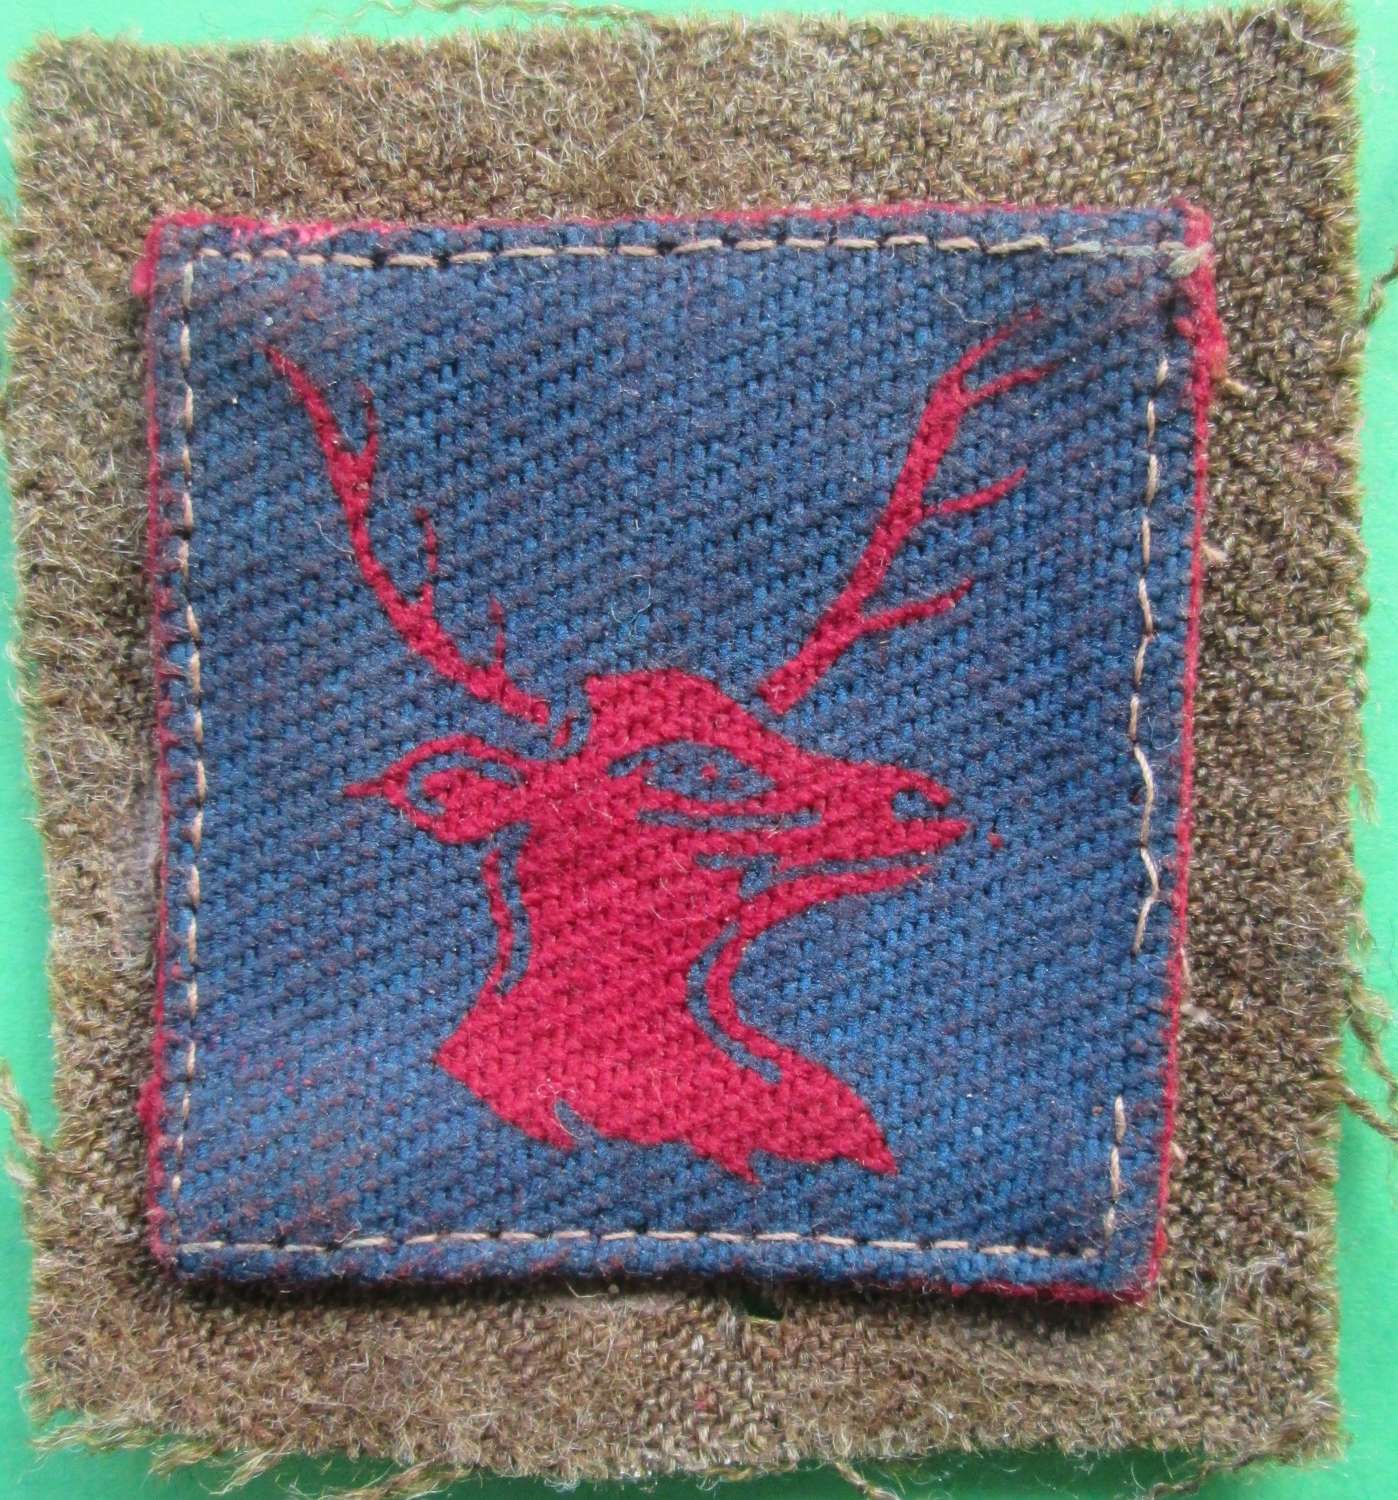 A 22ND ARMOURED FORMATION PATCH